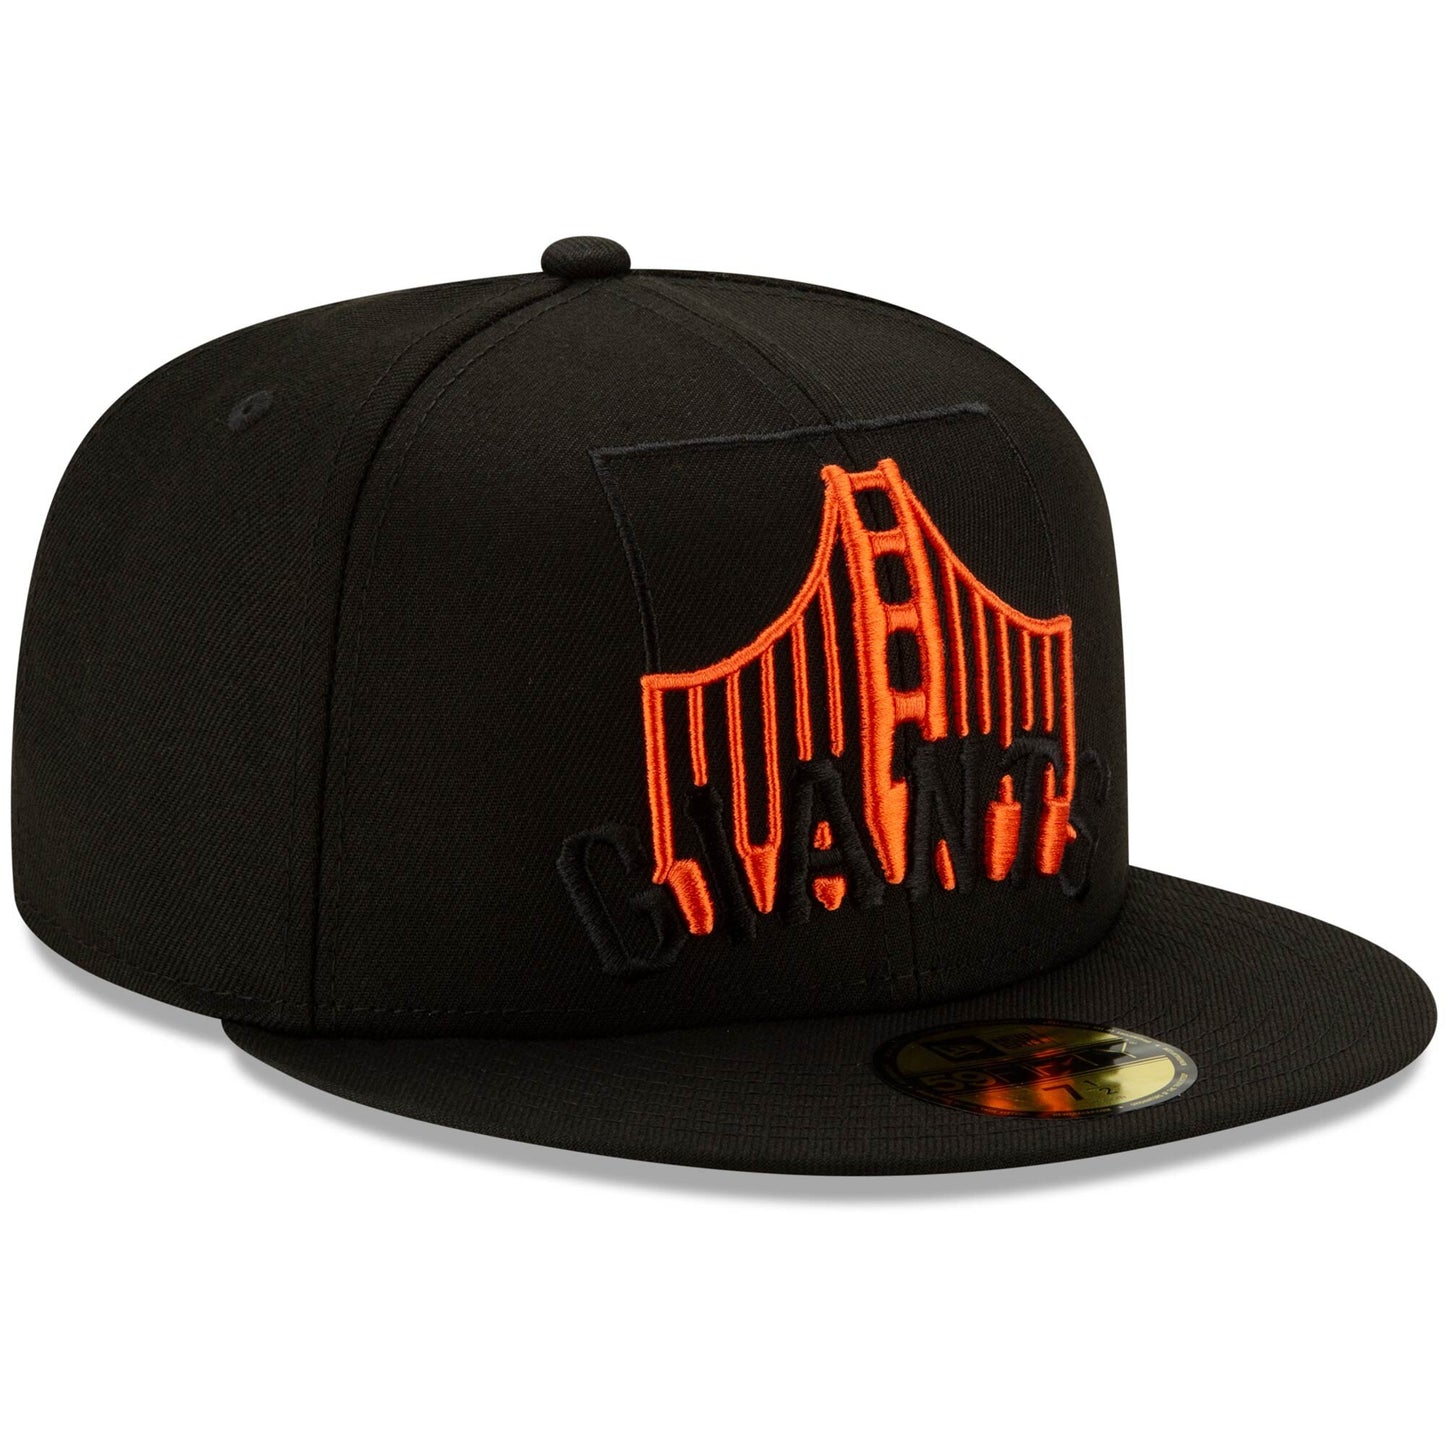 SAN FRANCISCO GIANTS LOGO ELEMENTS 5950 FITTED